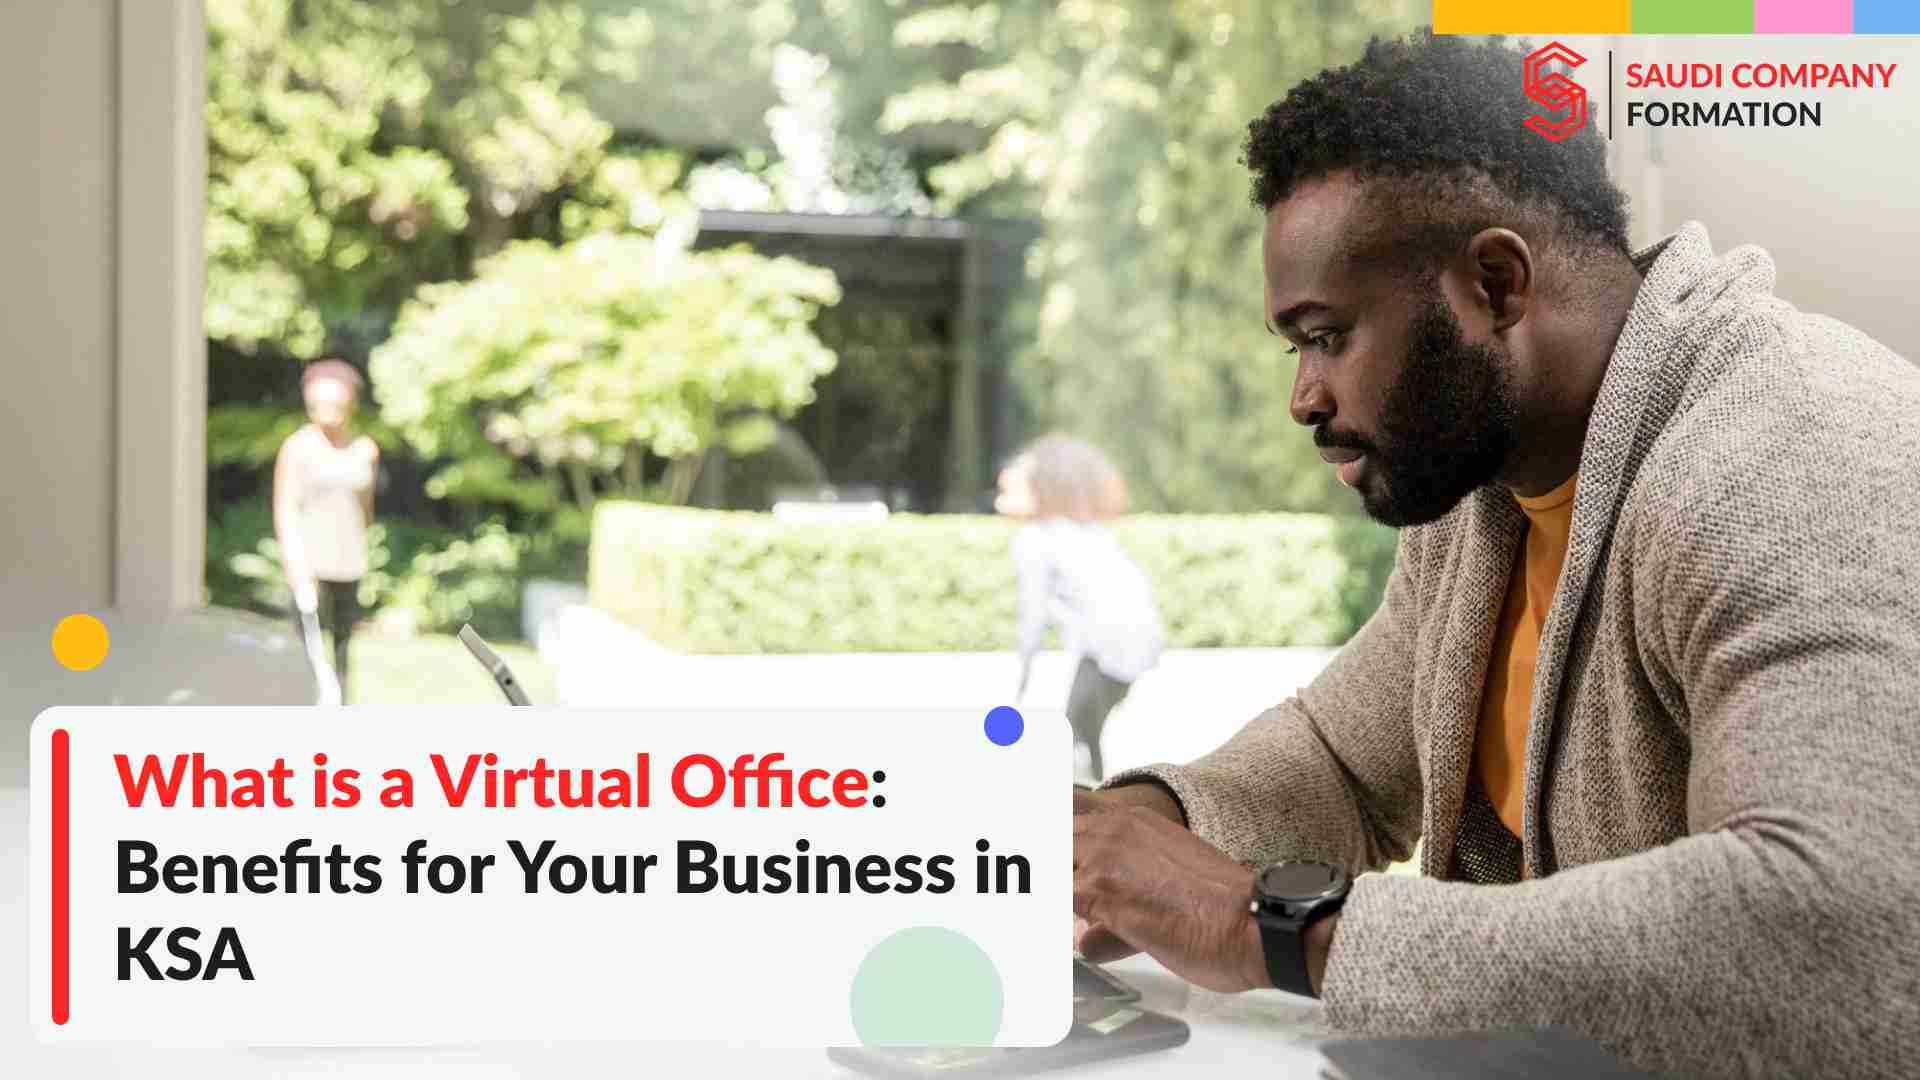 What is a Virtual Office and How Can Virtual Office Benefit Your Business In Saudi Arabia?